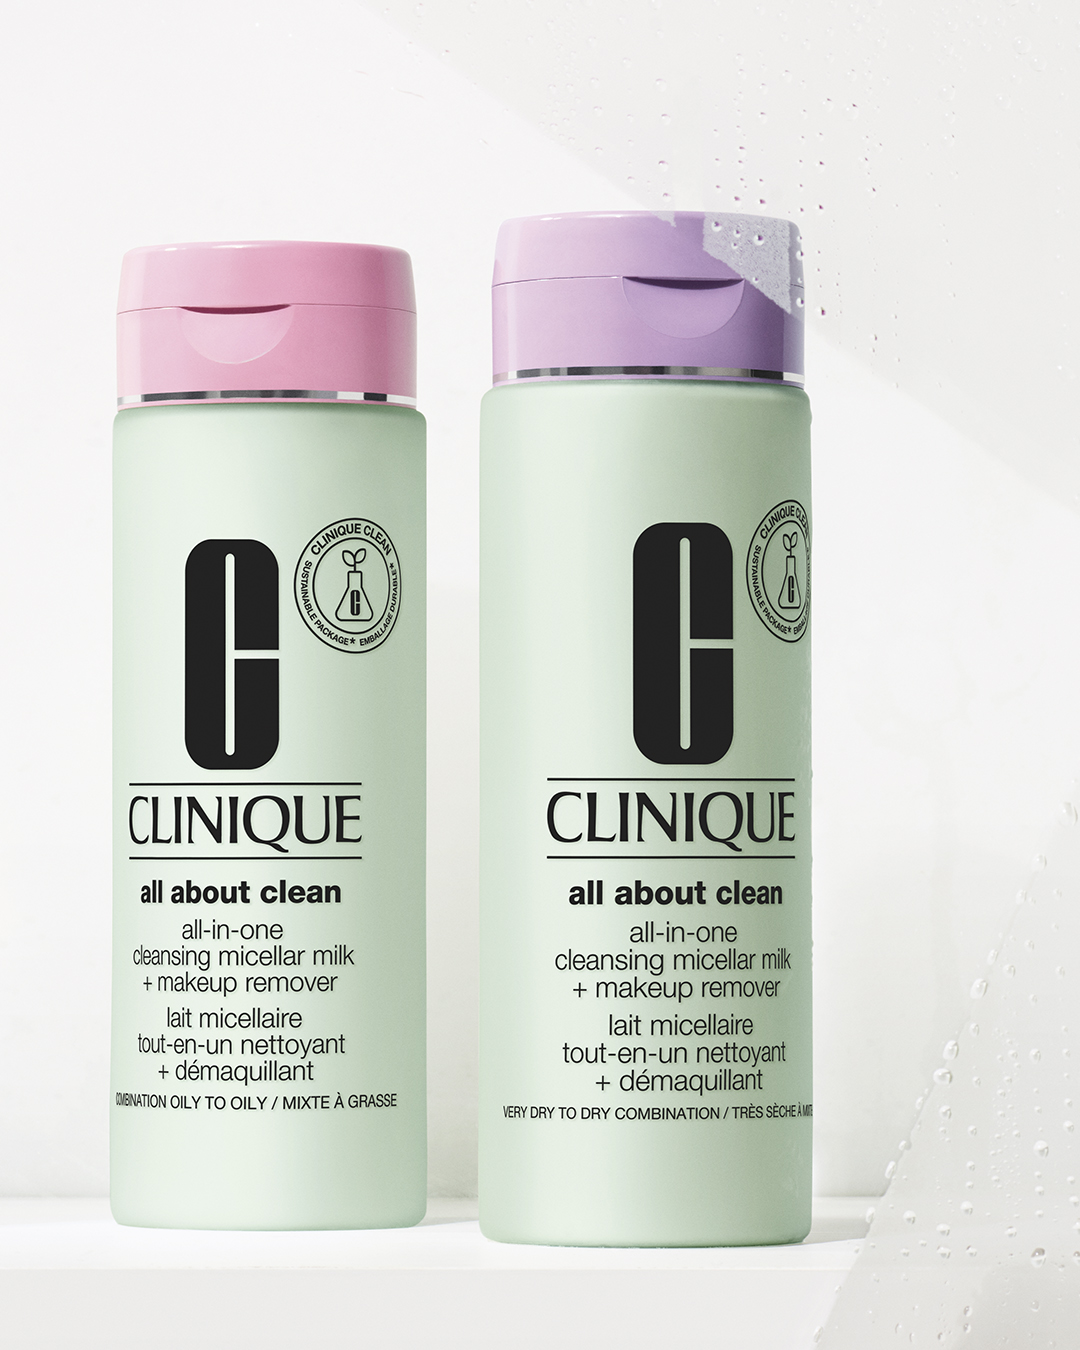 All-In-One Cleansing Micellar Milk + Makeup Remover